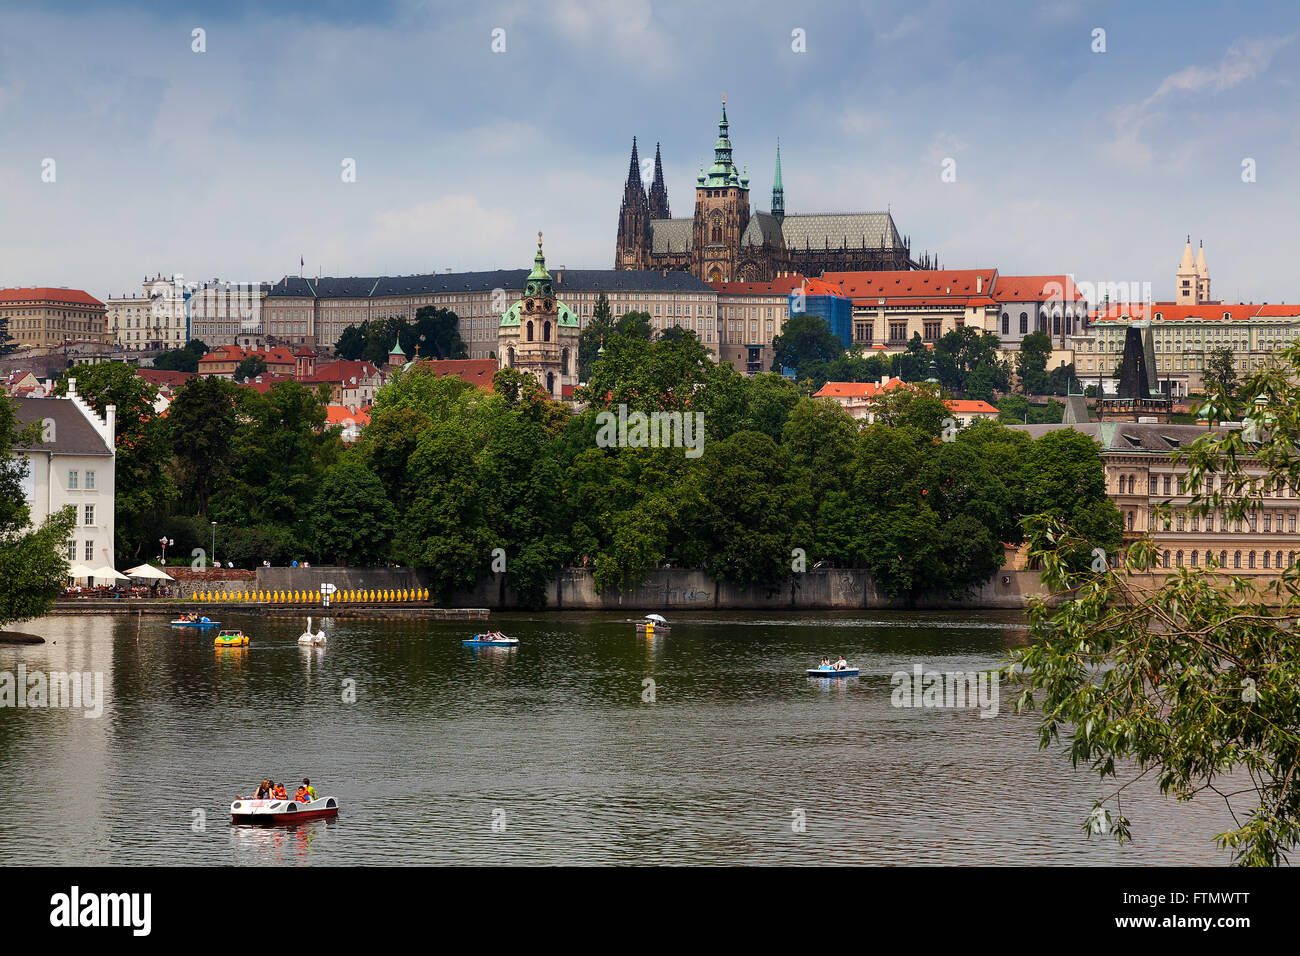 View across the Vltava River in Prague with the Castle and cathedral in the background Stock Photo